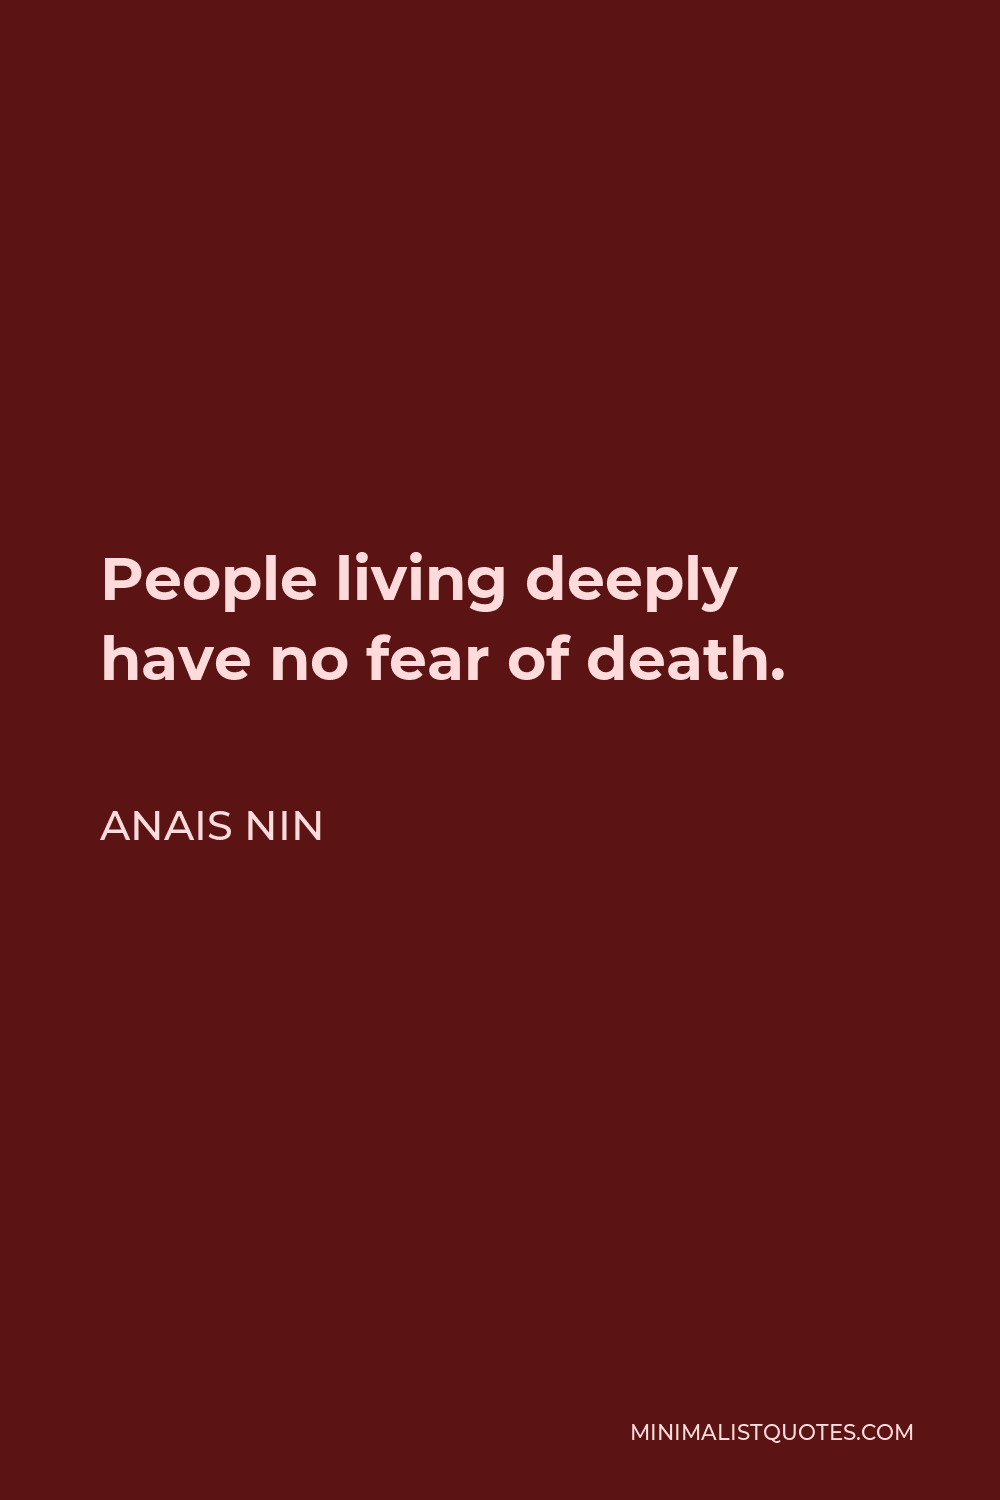 Anais Nin Quote - People living deeply have no fear of death.